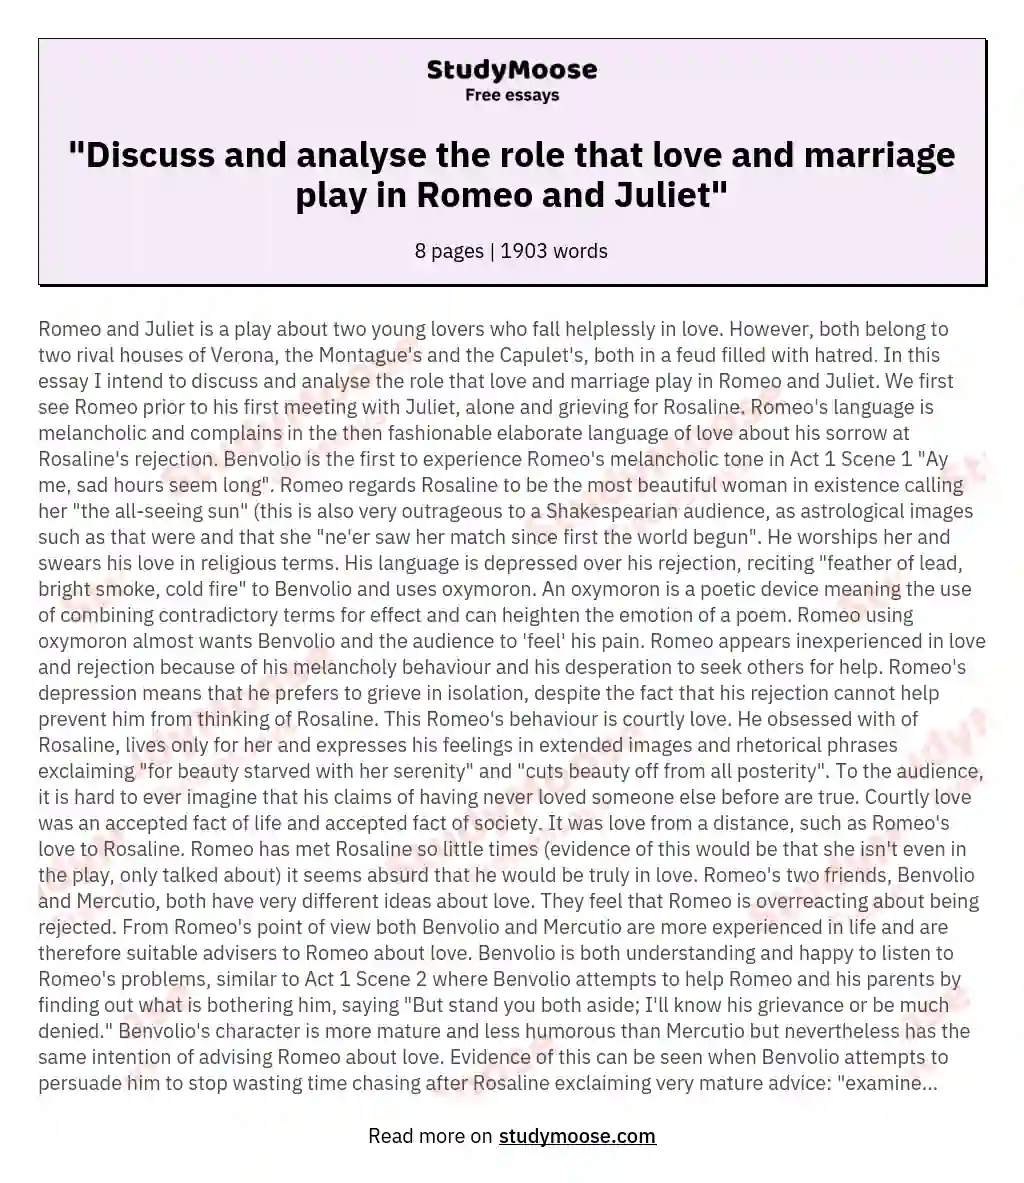 "Discuss and analyse the role that love and marriage play in Romeo and Juliet" essay